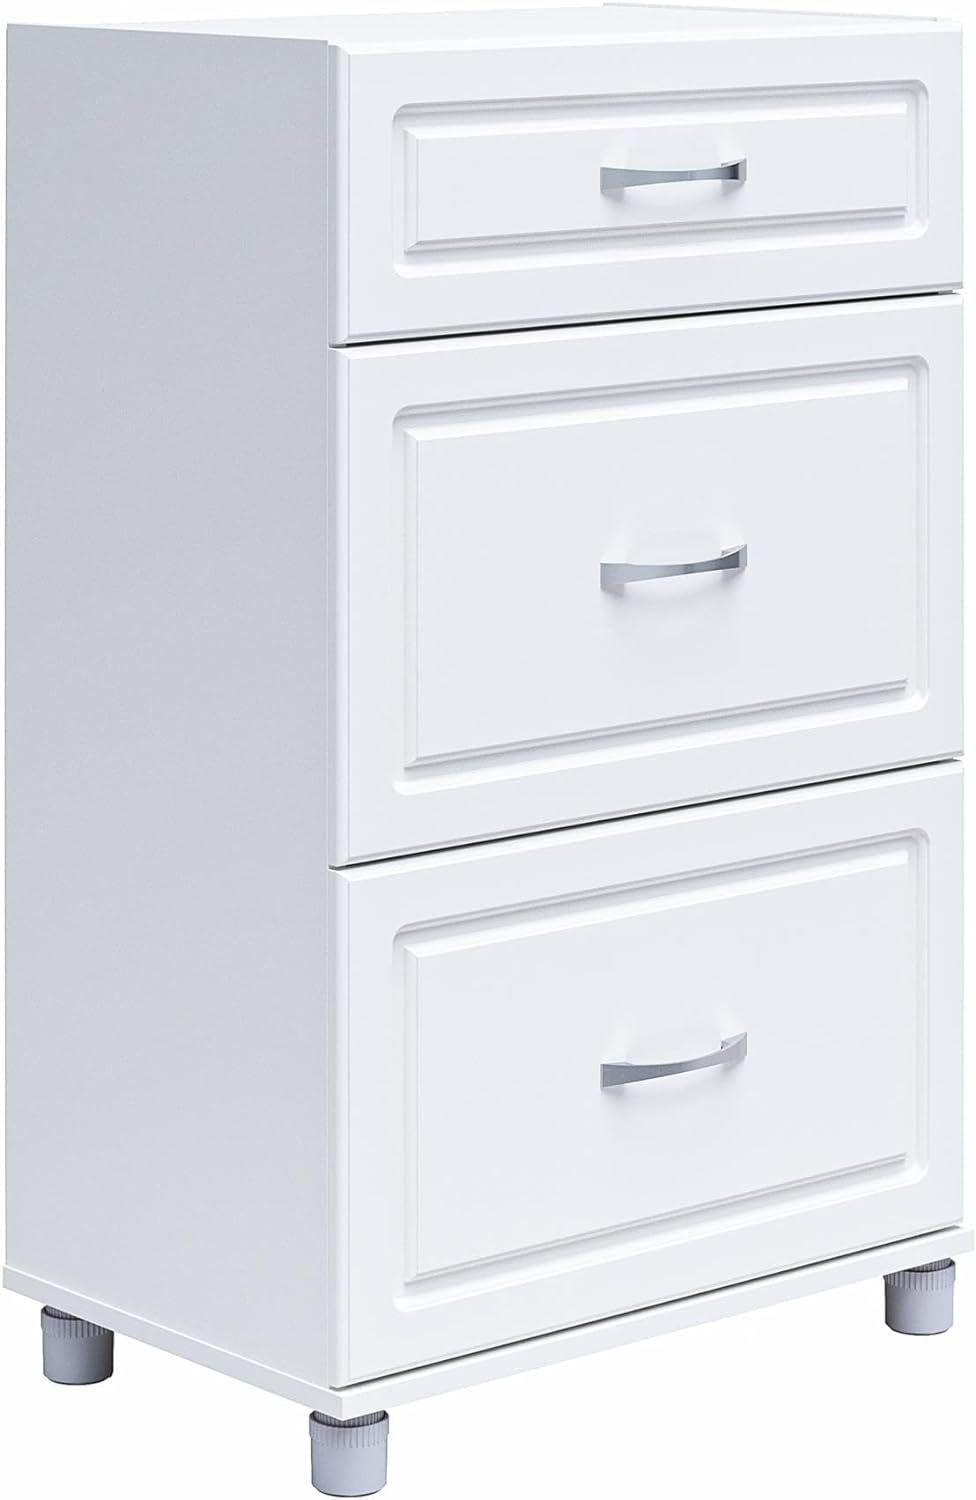 Kendall White Freestanding Lockable Office Cabinet with Adjustable Shelving